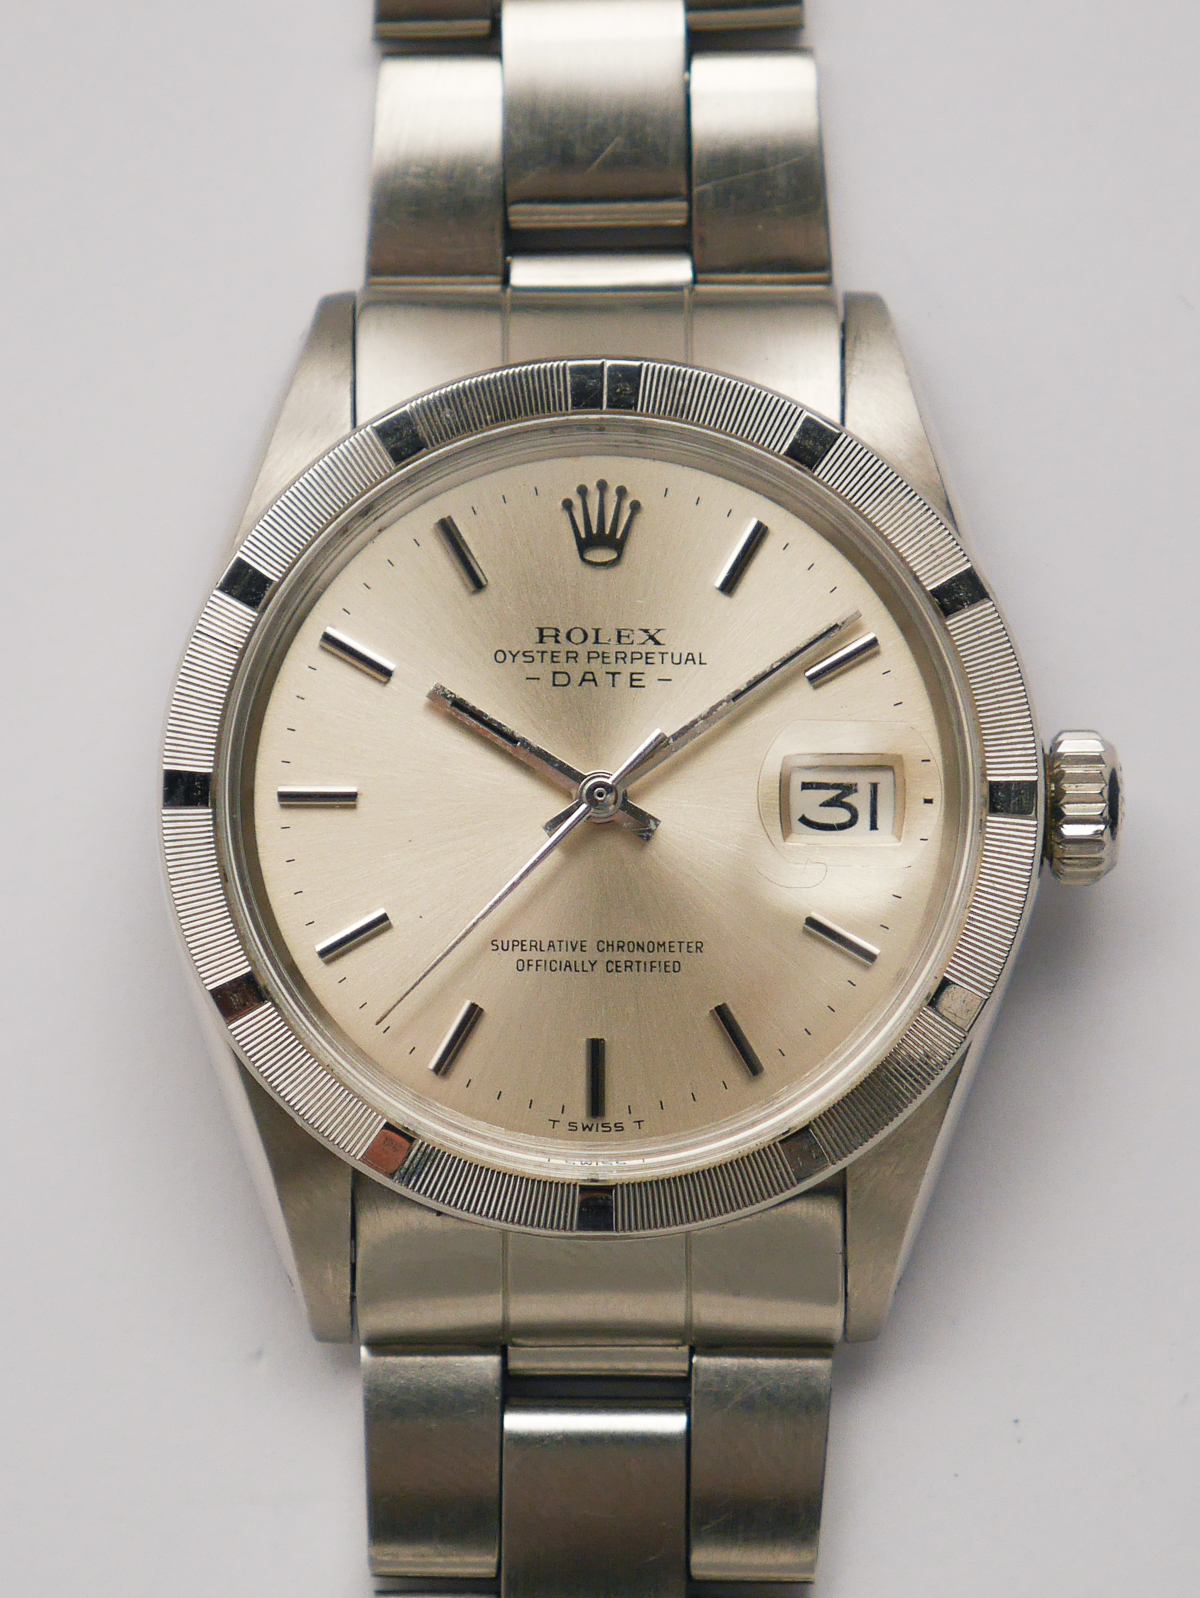 1970 Rolex Oyster Perpetual - Sabiwatches